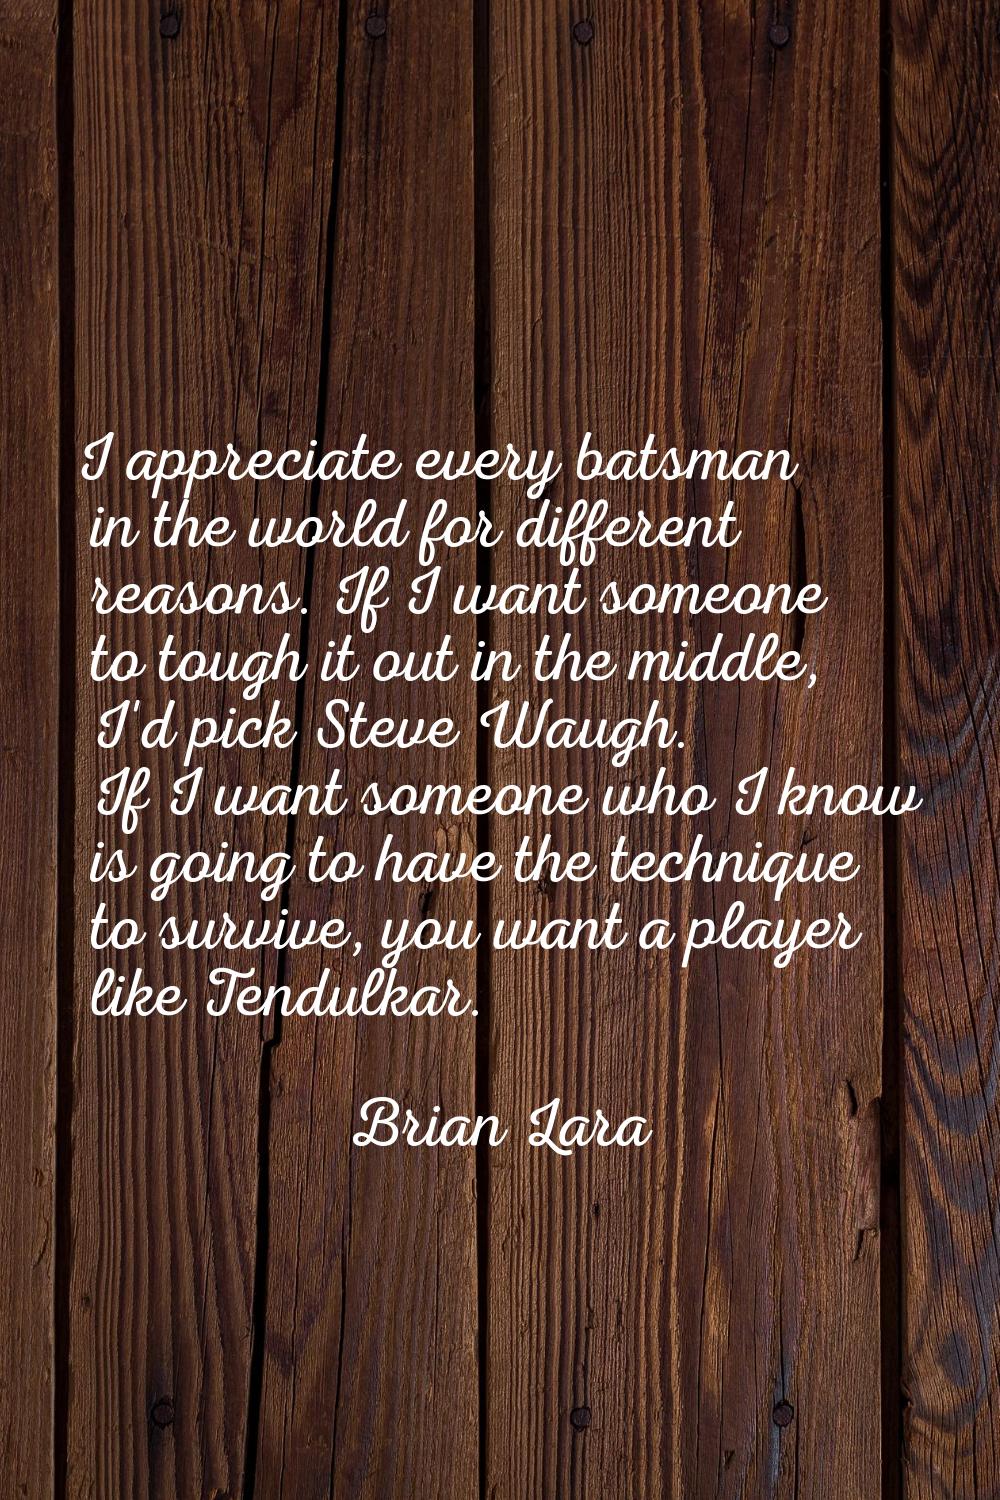 I appreciate every batsman in the world for different reasons. If I want someone to tough it out in